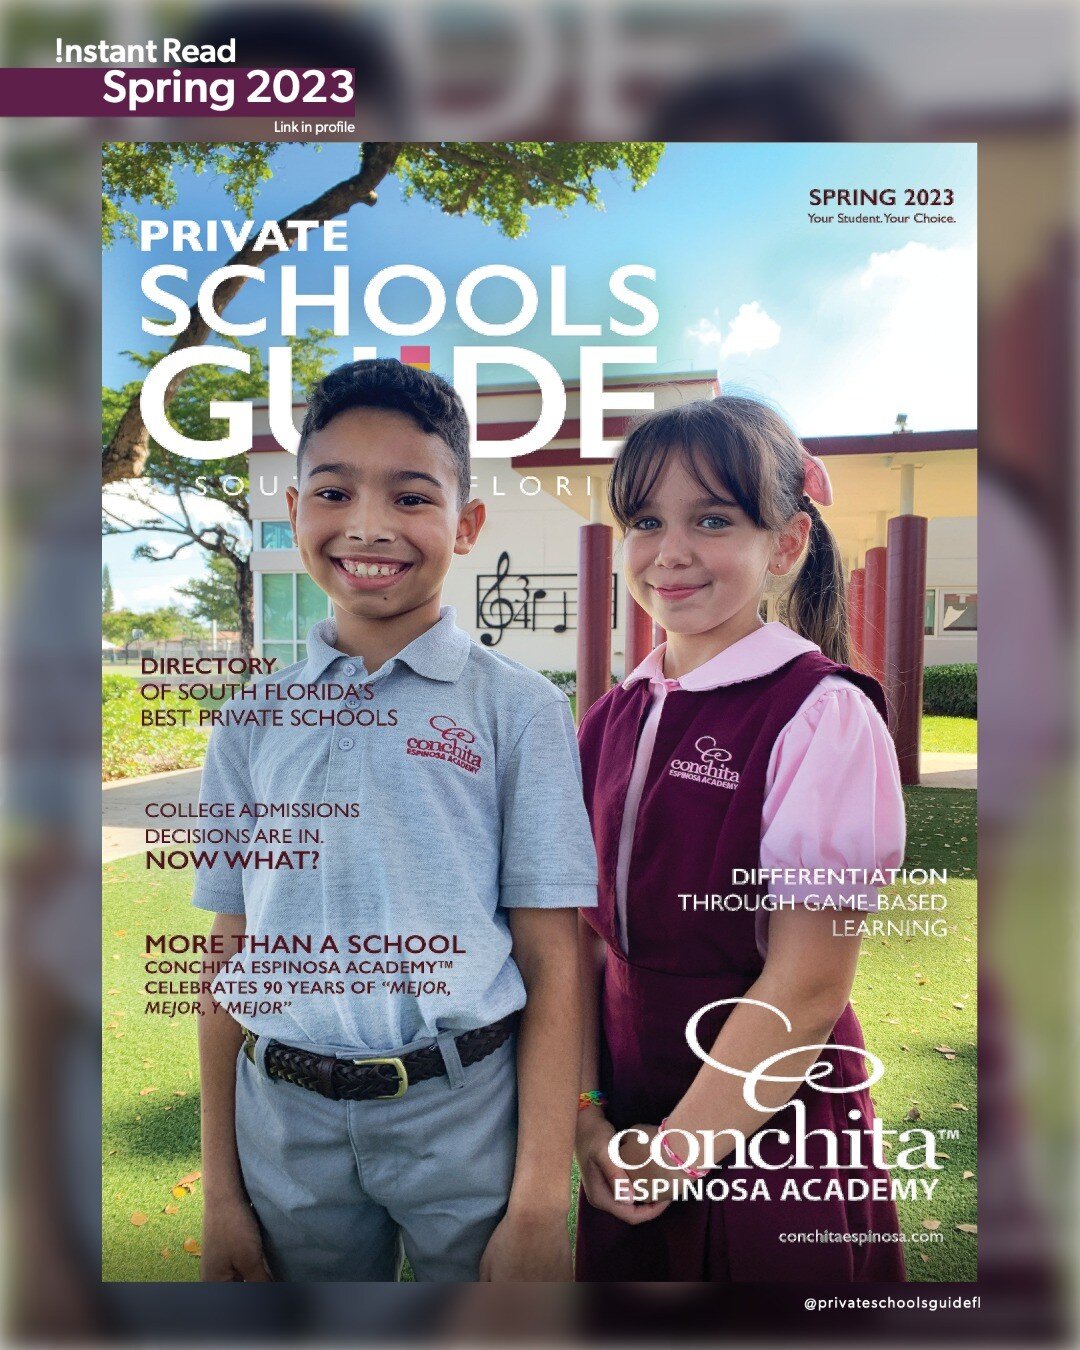 Our enrichment issue is here! Read our digital issue instantly (link in bio) or request your free print copy! Learn how you can extend the educational experiences for your child this summer. 

On the Cover: 
@conchitaespinosaacademy a co-educational 